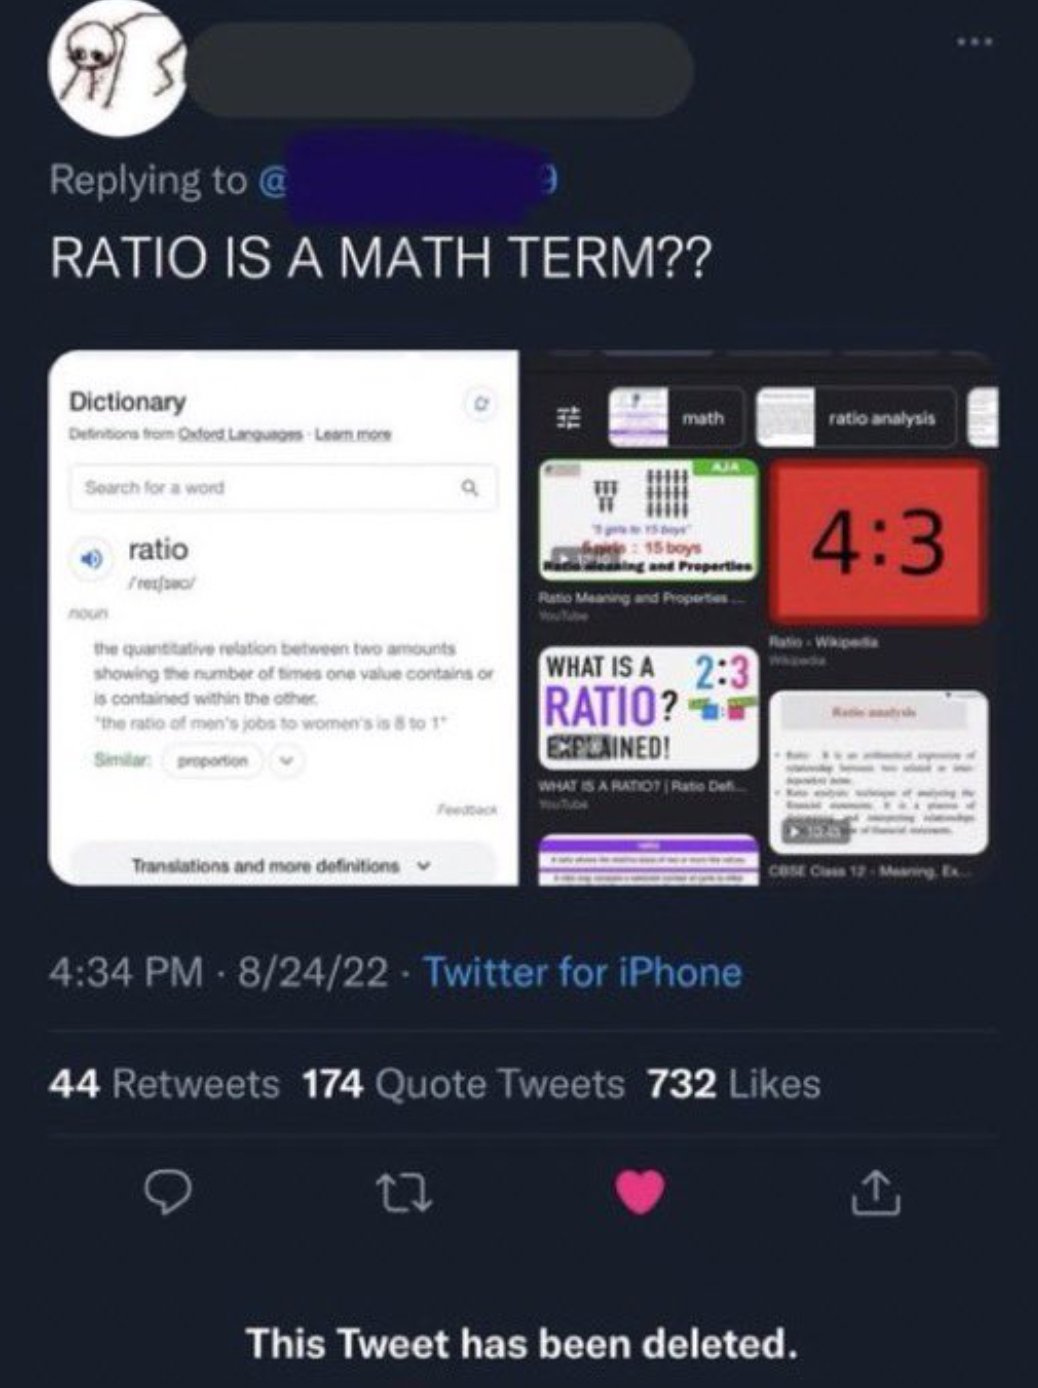 ratio is a math term twitter - Ratio Is A Math Term?? Dictionary ratio What Is A Ratio? Elained! 82422 Twitter for iPhone 44 174 Quote Tweets 732 27 This Tweet has been deleted.